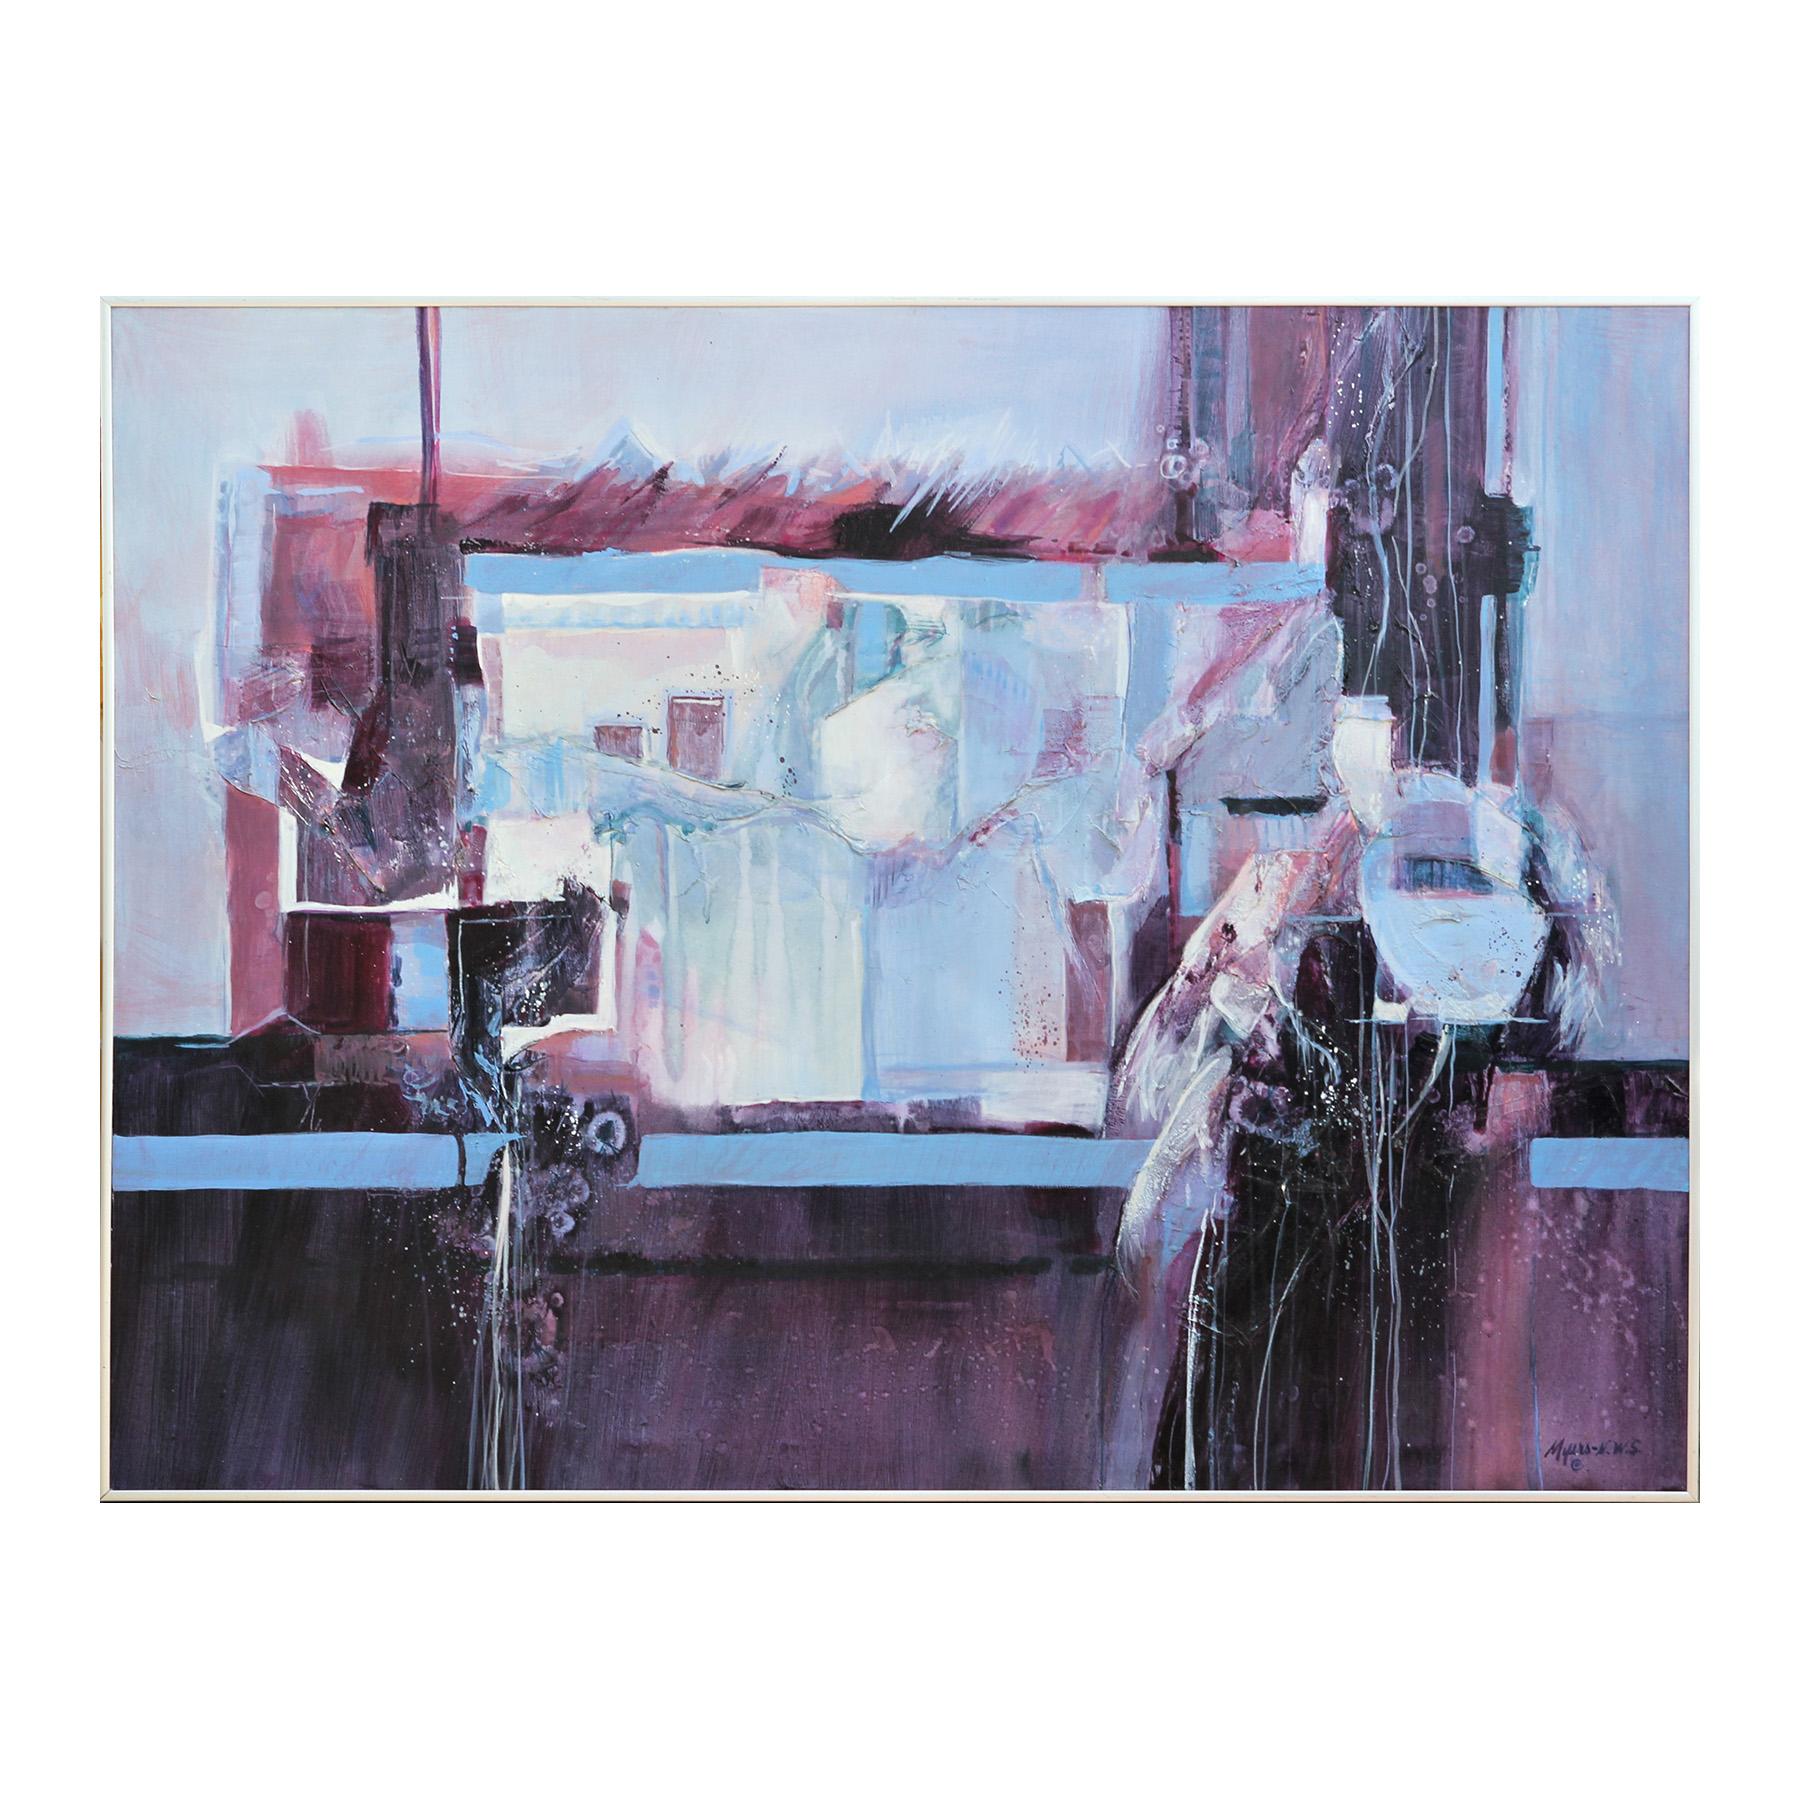 Blue and purple modern abstract mixed media painting by Texas artist Carole Myers. The work features expressive strokes of color loosely forming a view from a window in Cuernavaca, Mexico. The piece is signed in the front lower right corner.